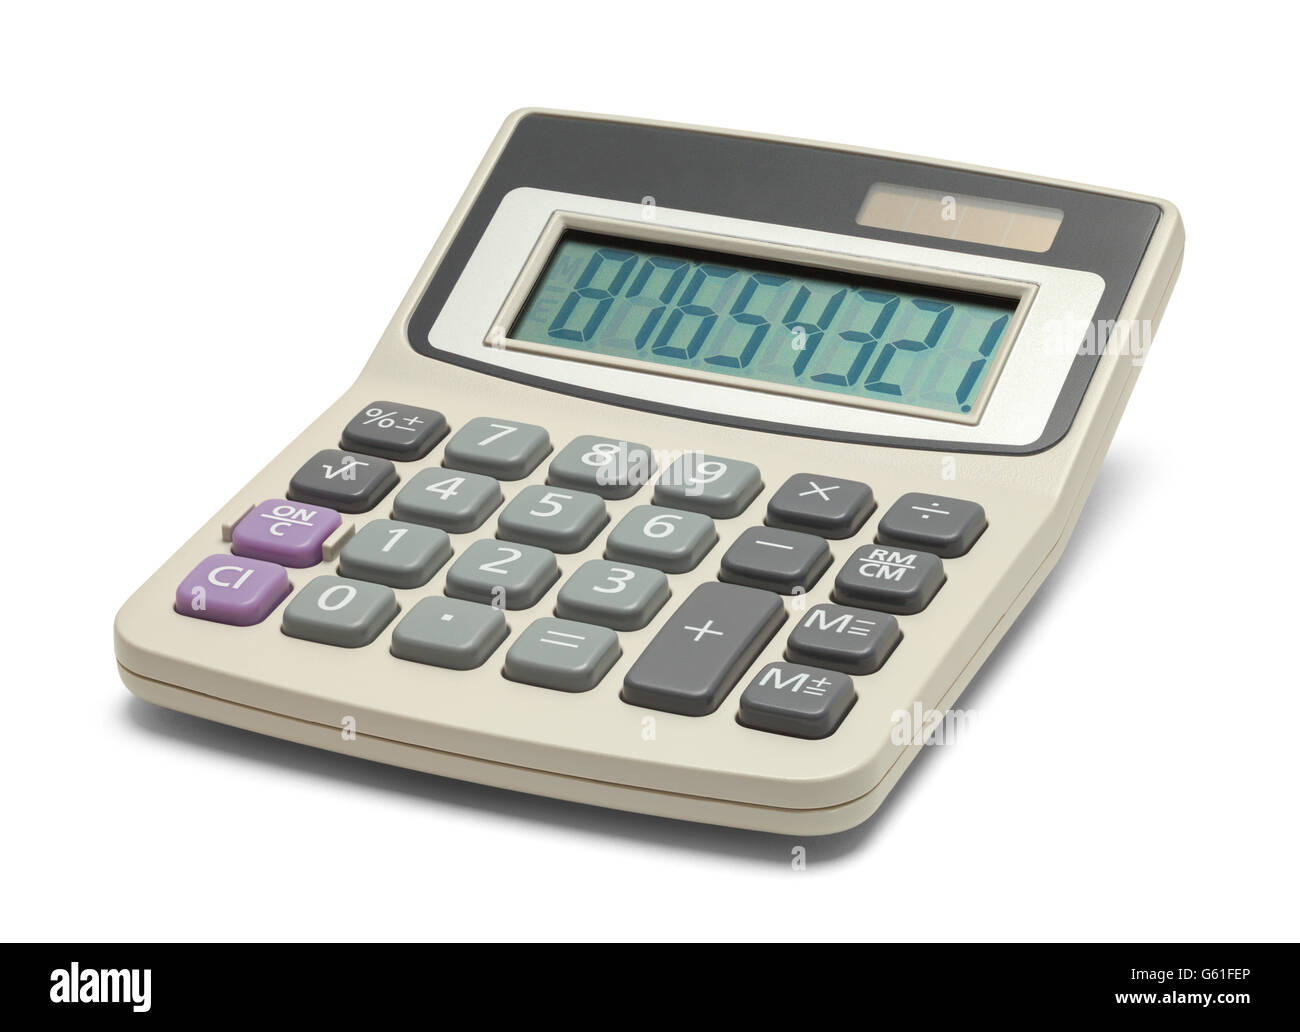 Business Office Calculator Isolated on White Background. Stock Photo